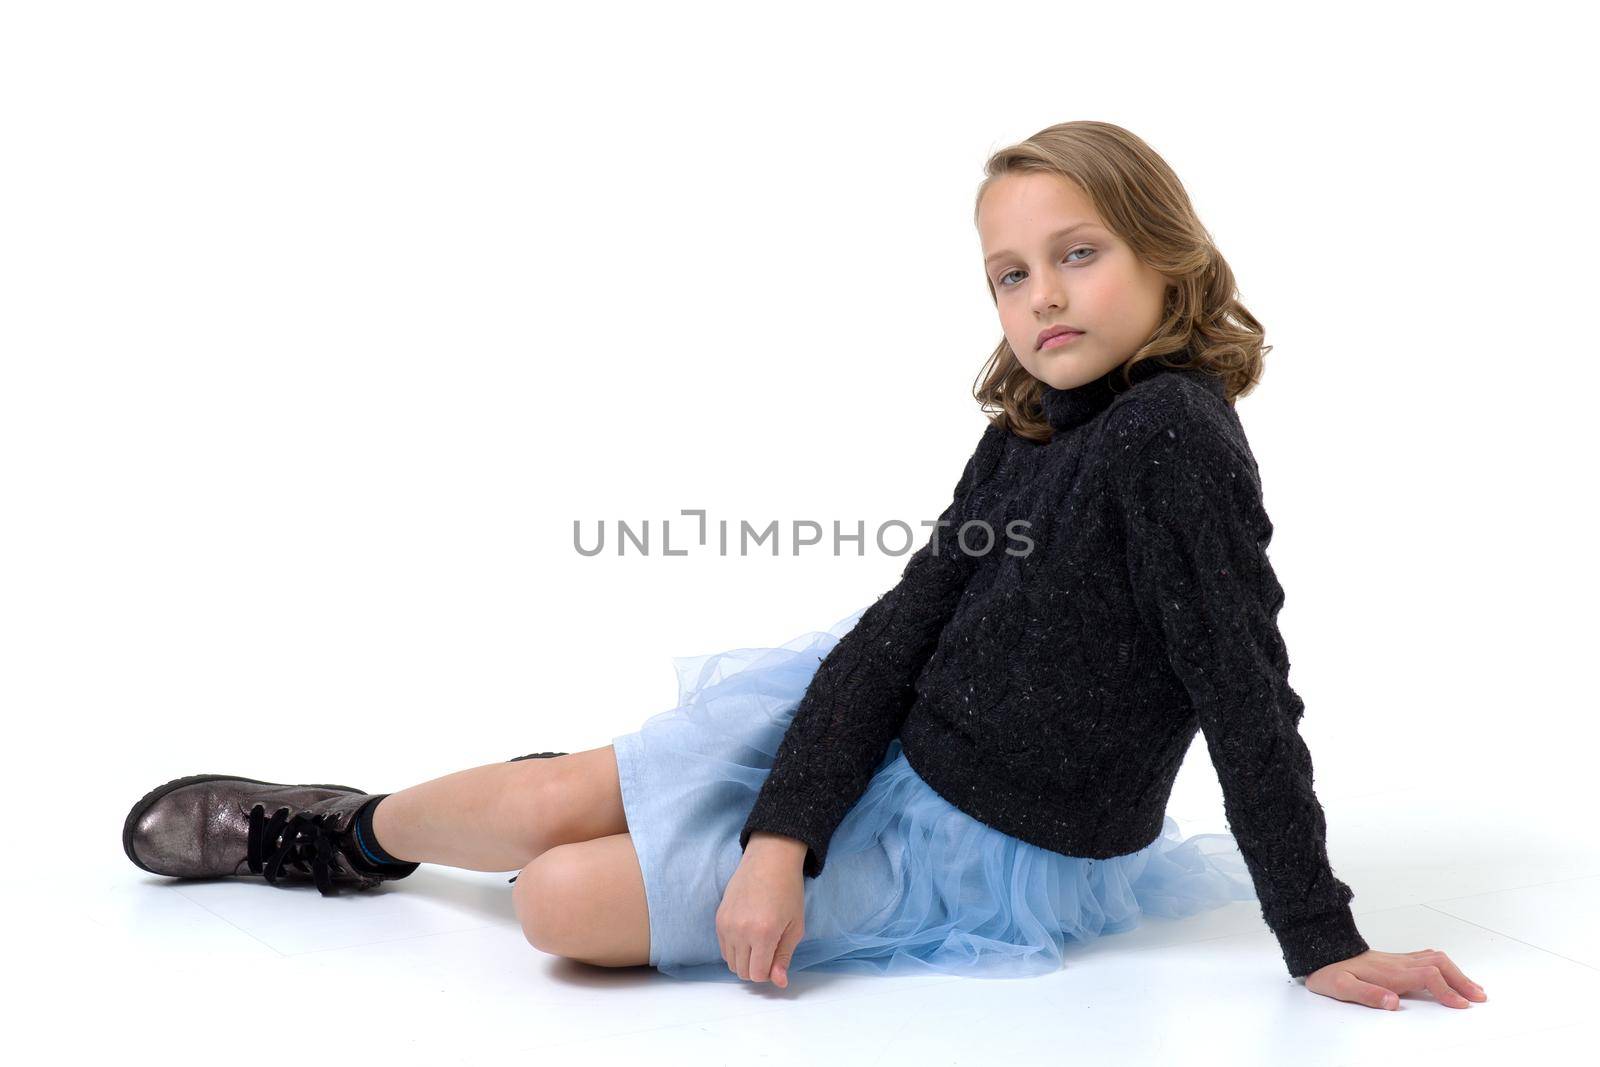 A beautiful girl in a black jumper and a blue fluffy skirt sits on the floor. Pretty blonde woman in fashionable clothes posing in studio on white background